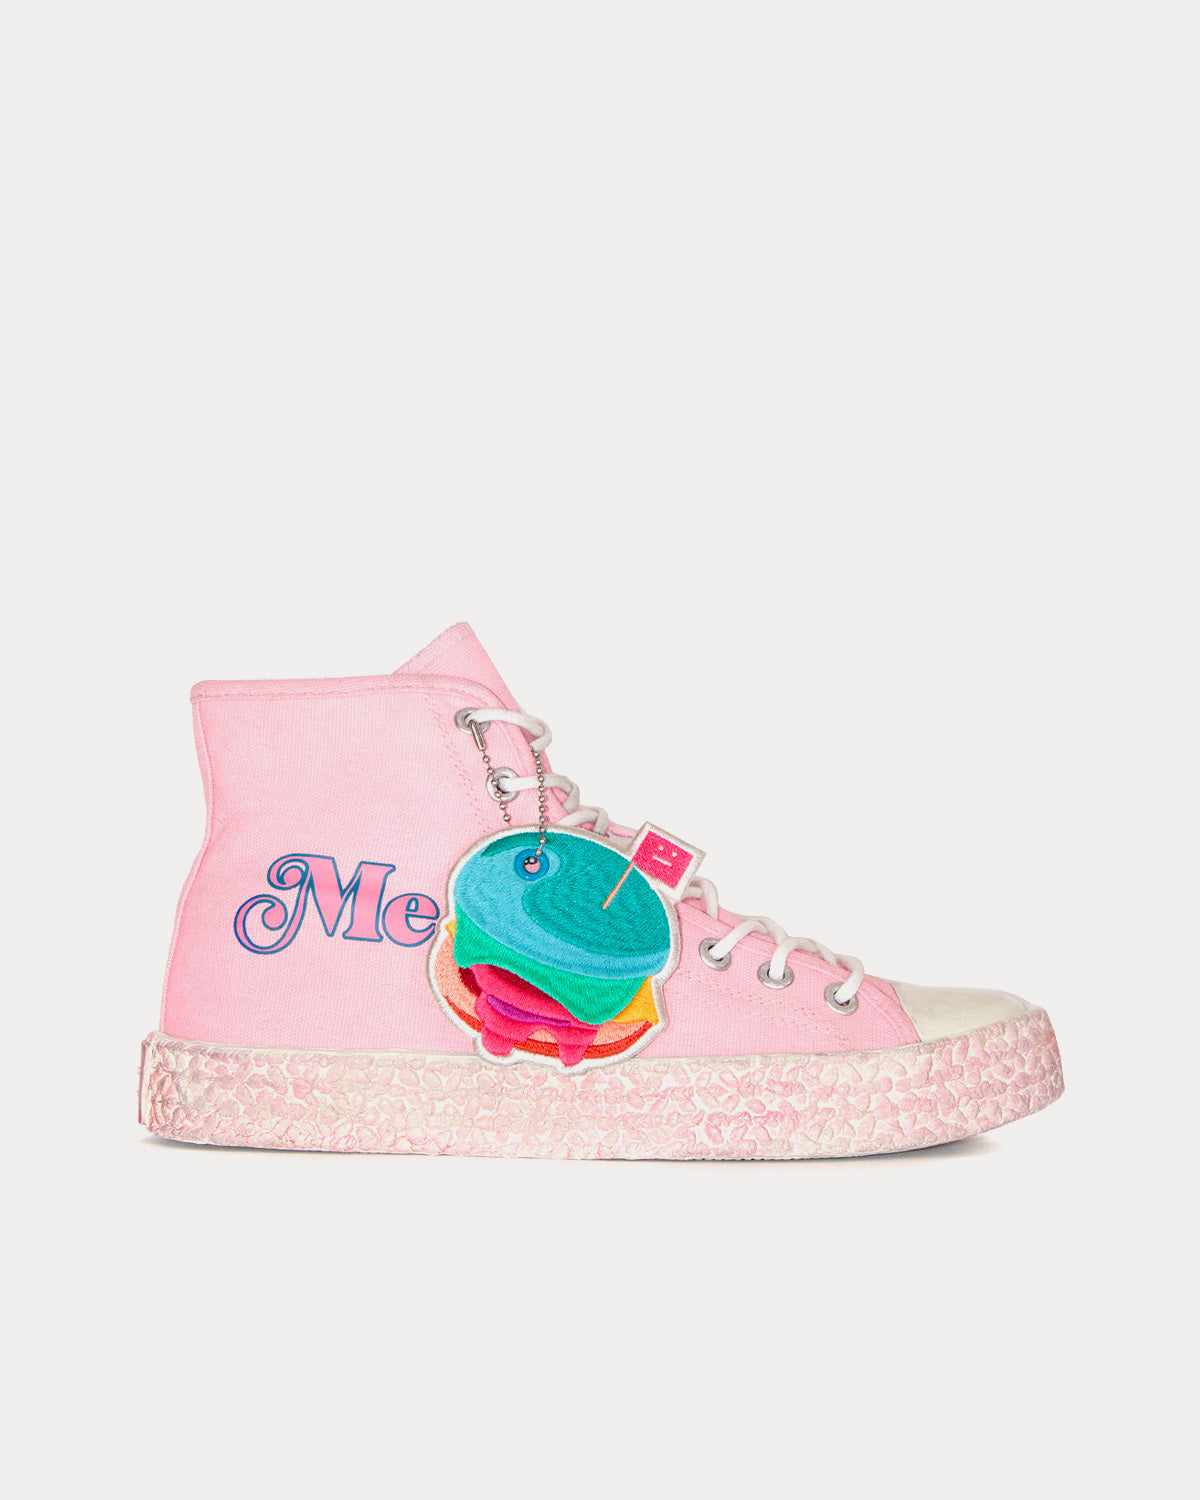 Acne Studios - Print Canvas Pink / White High Top Sneakers